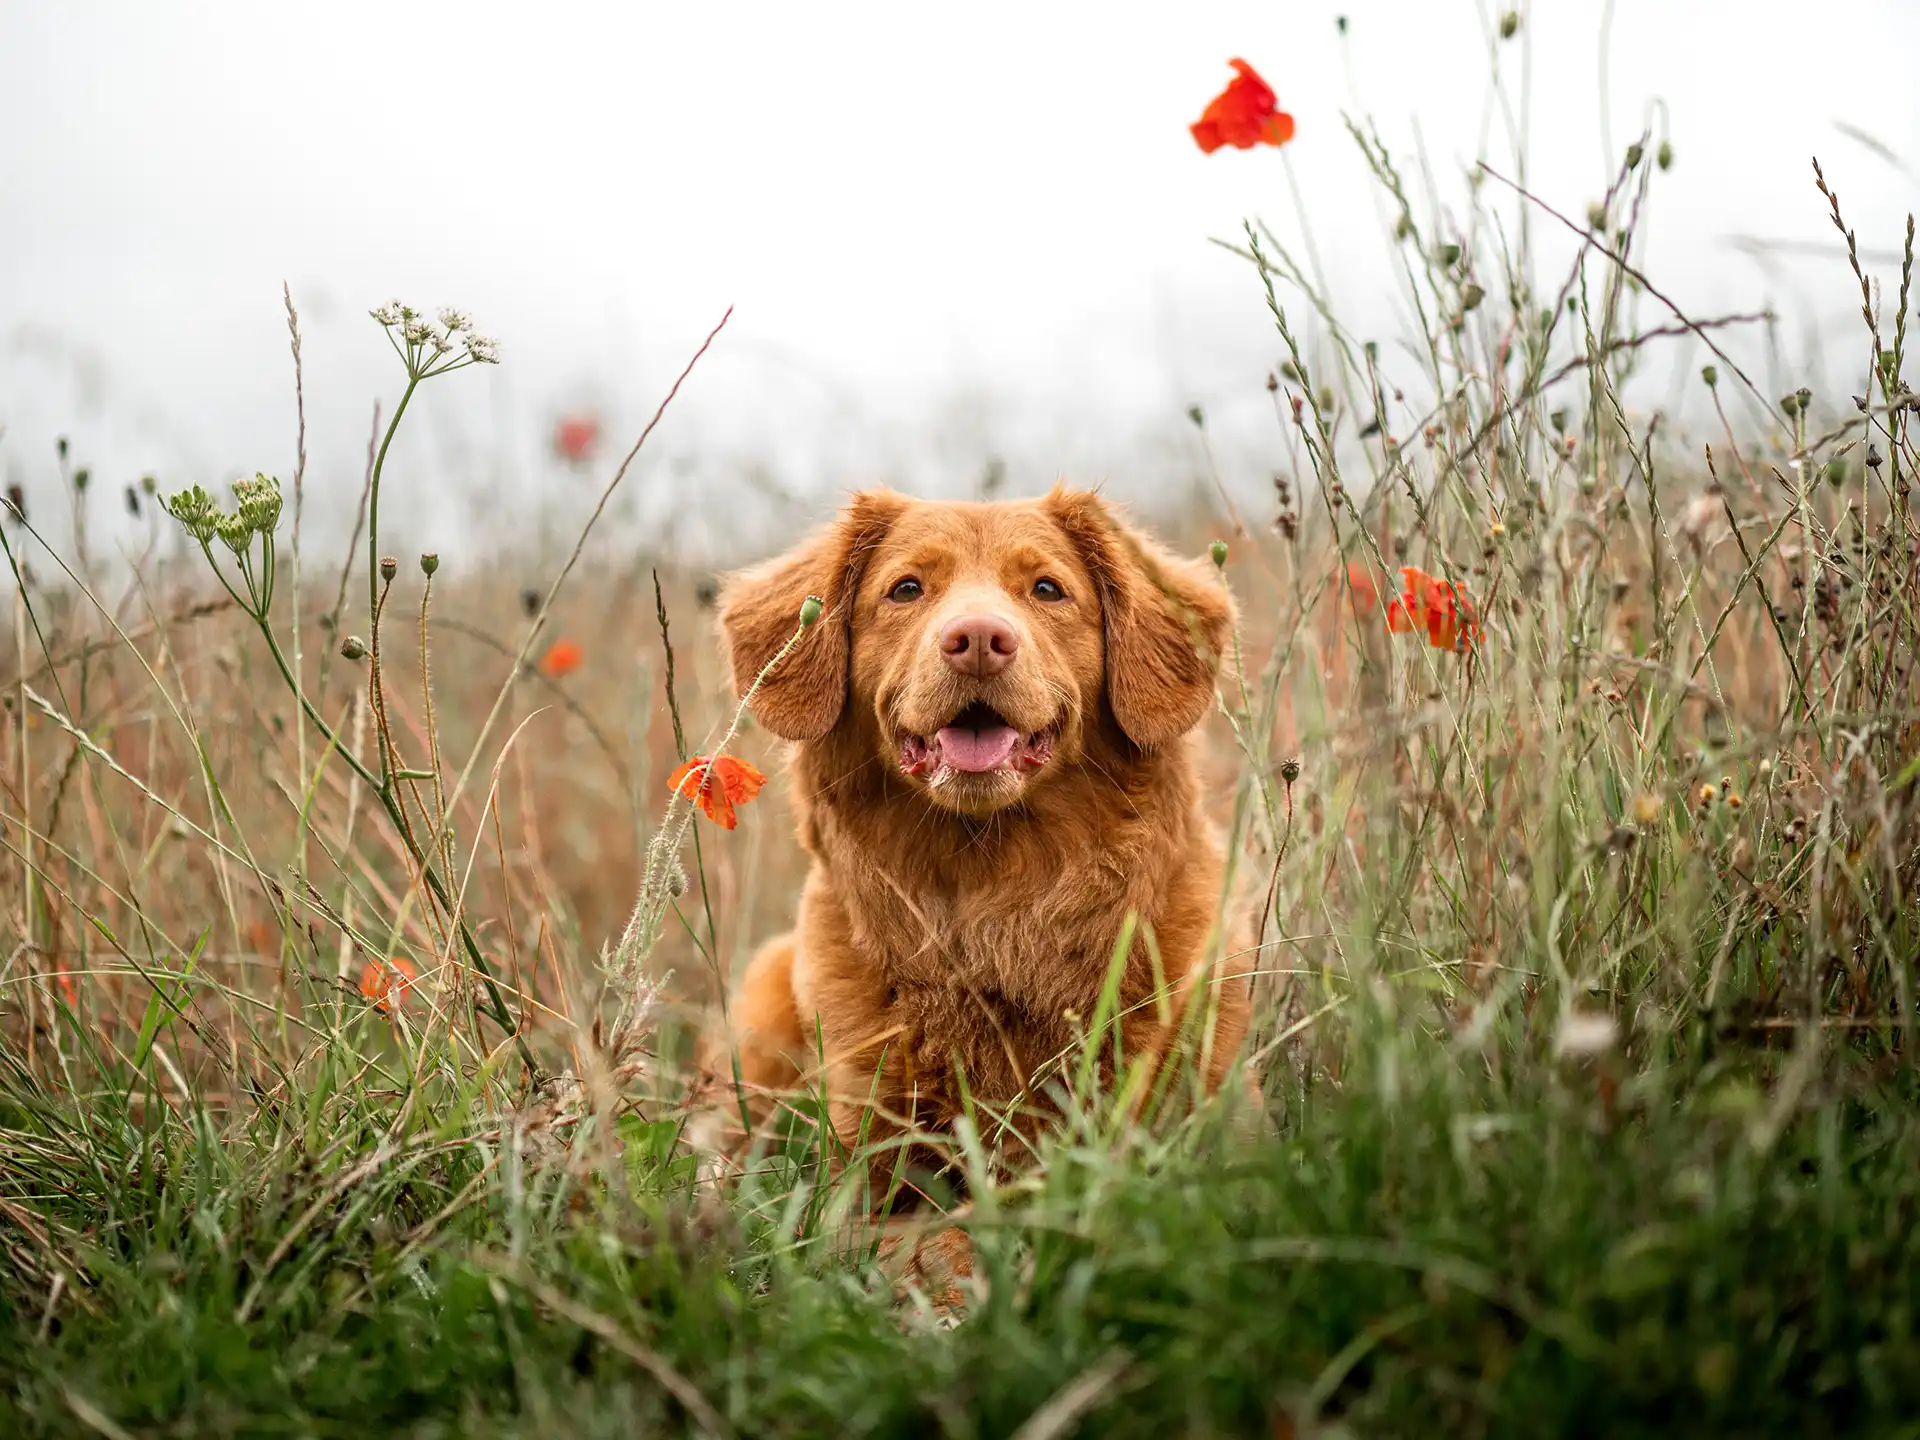 Retriver dog sitting in a field of red flowers